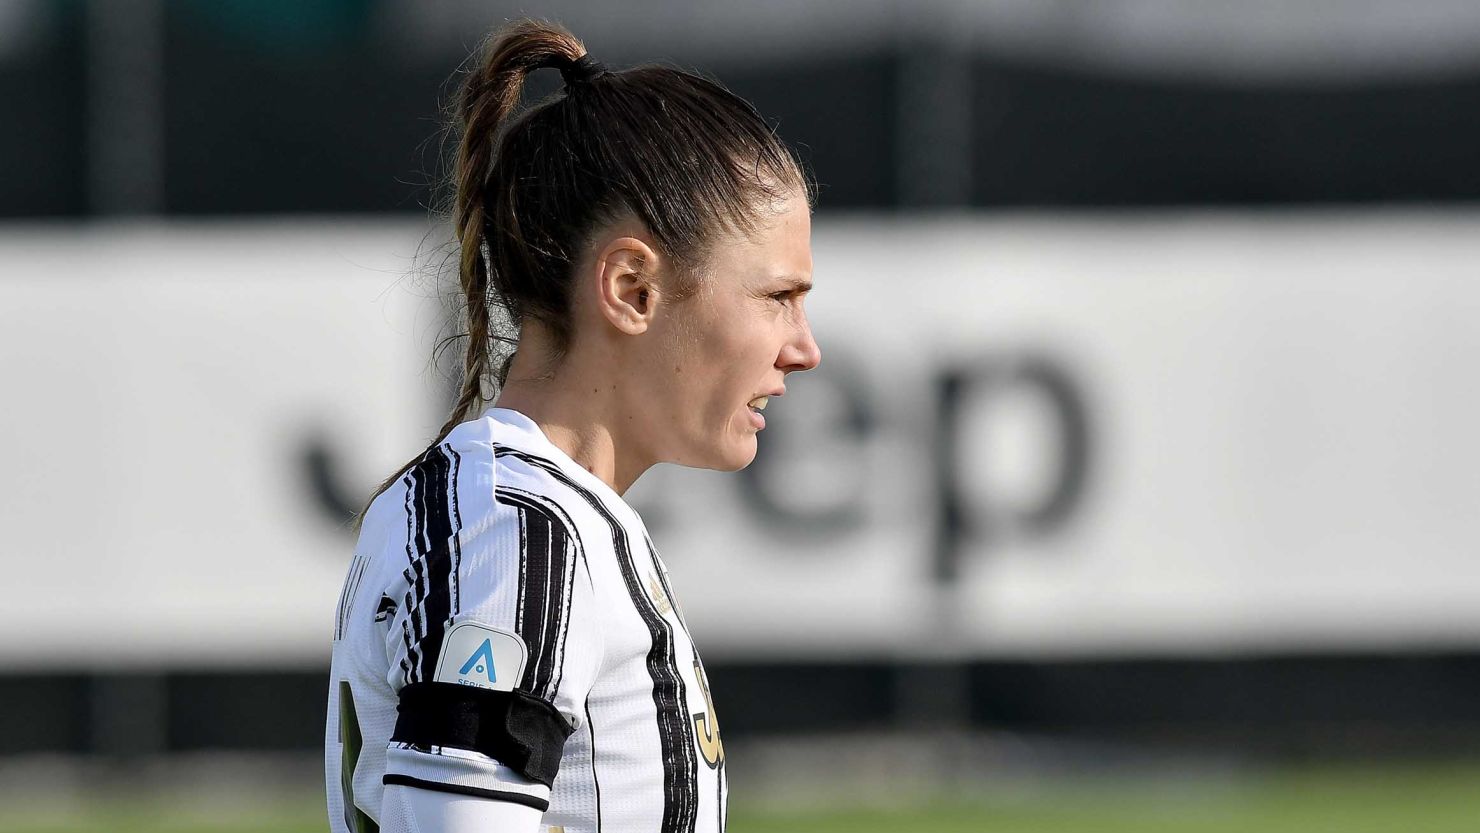 Cecilia Salvai of Juventus Women FC posed for an offensive photograph shared on the women's team official account.